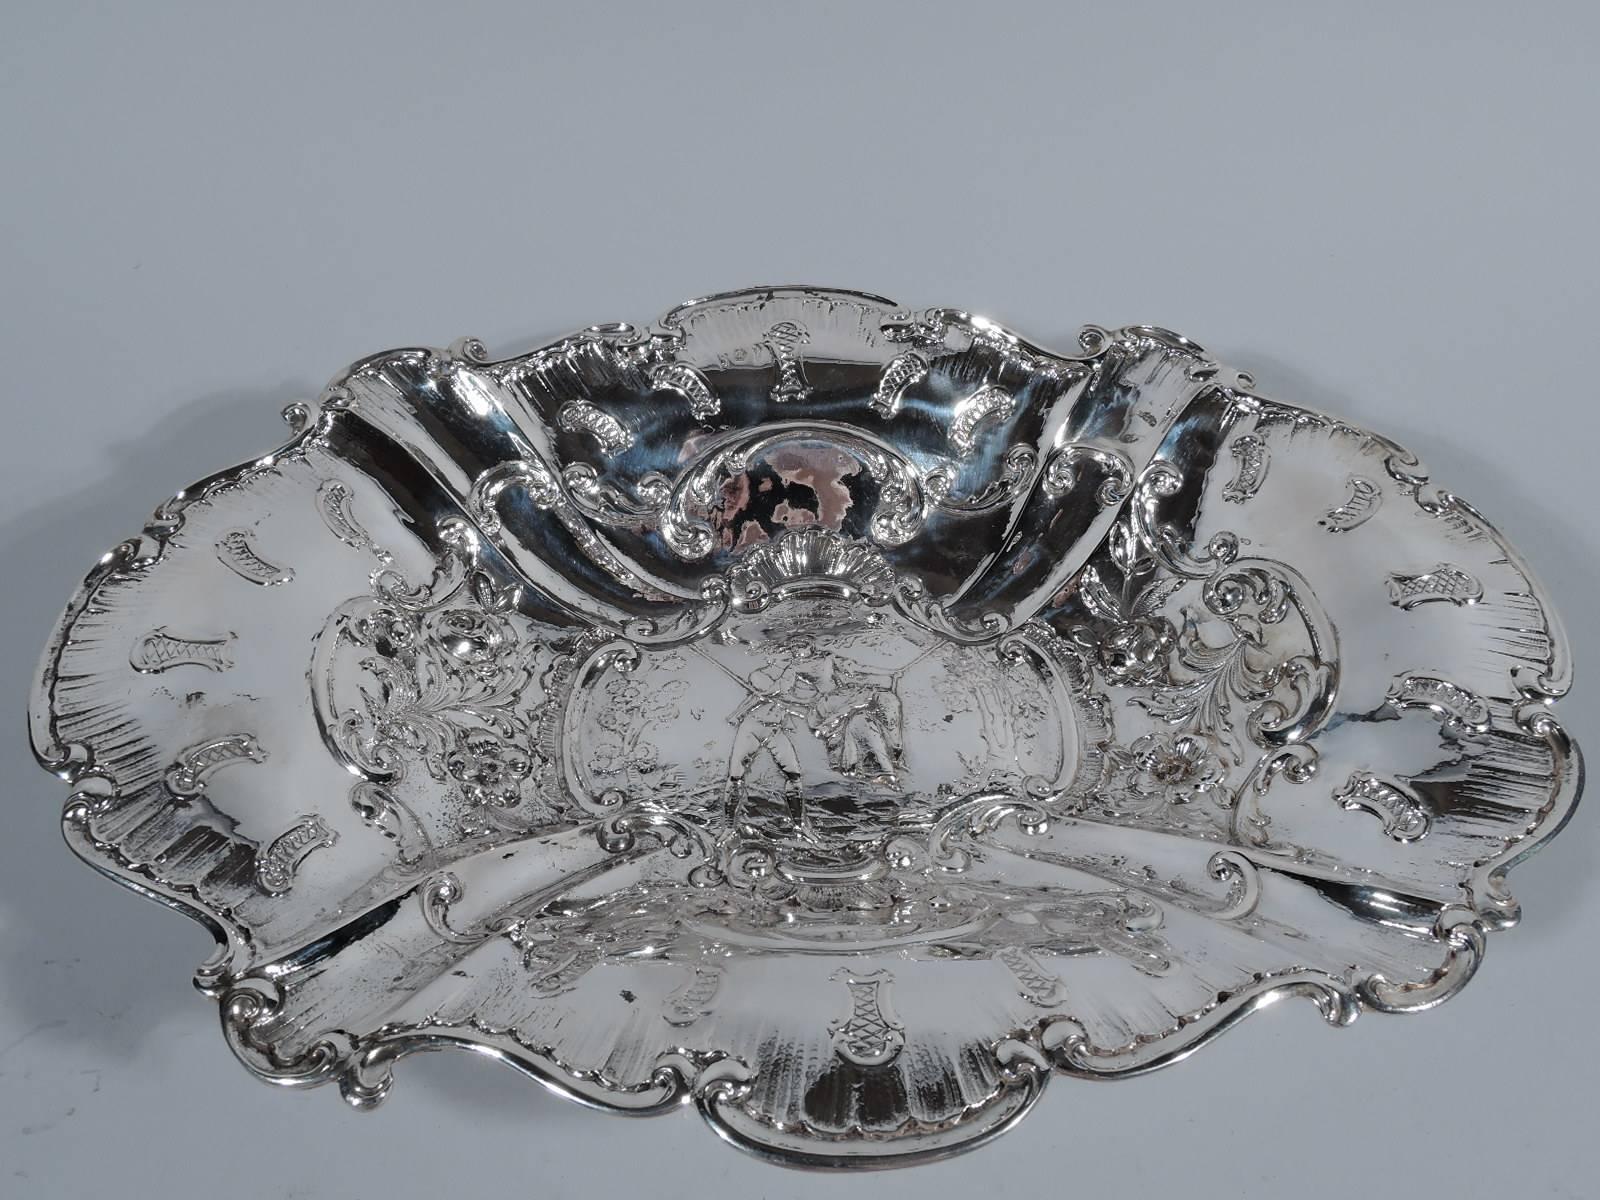 German 800 silver bowl, circa 1900. Ovoid with wide and flared mouth and four paw supports with leaf mounts. Chased and repousse scrolls and leaves. In well a gallant pushes a lady on a swing in a bower. A popular period motif sweetly portrayed. Rim